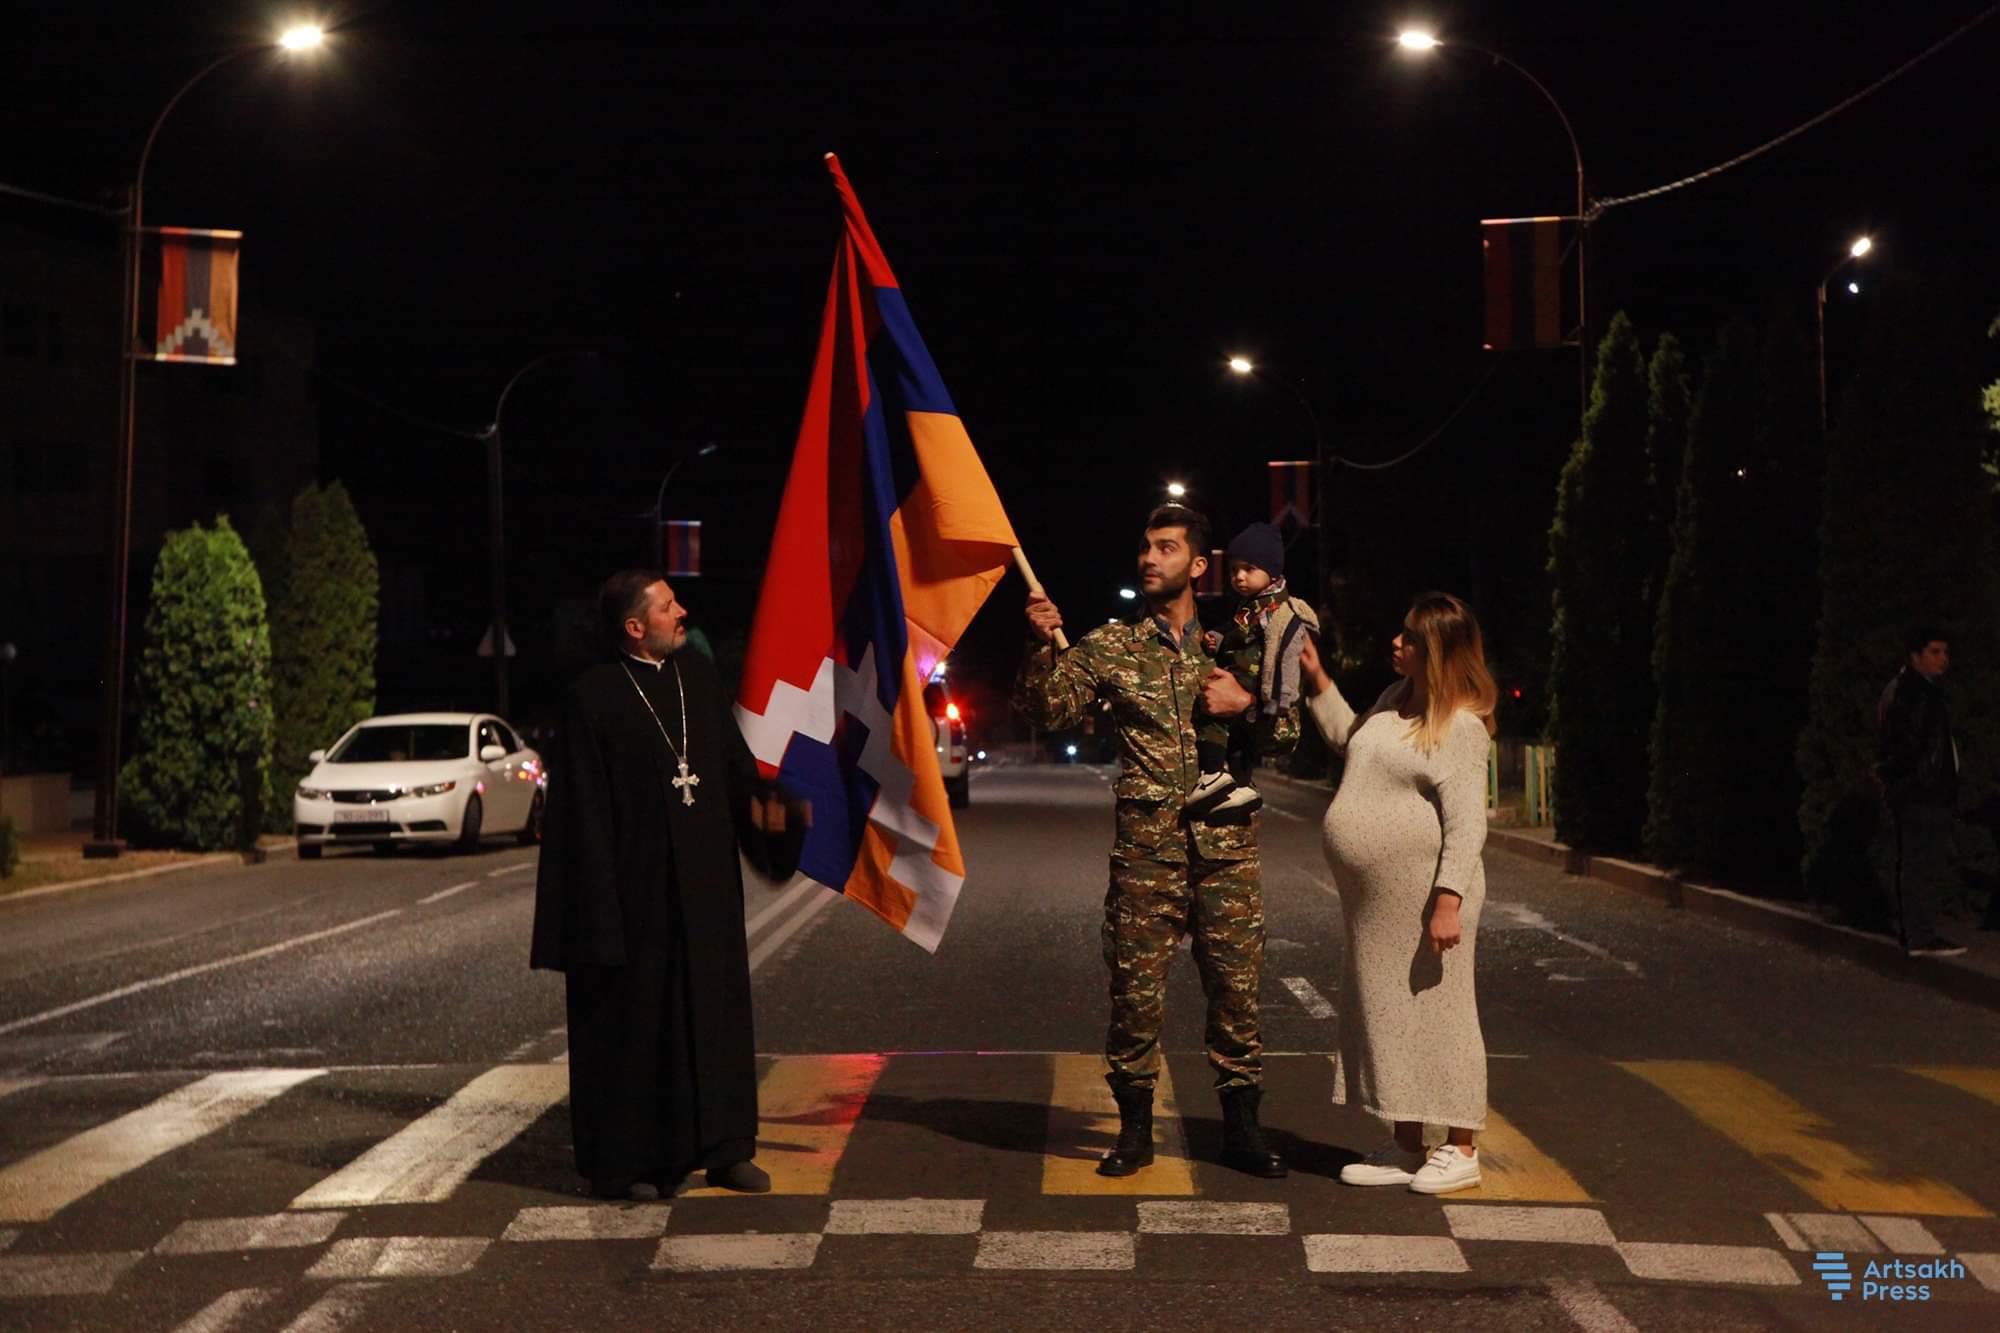 Torchlight procession entitled “Artsakh Lives” held in Stepanakert